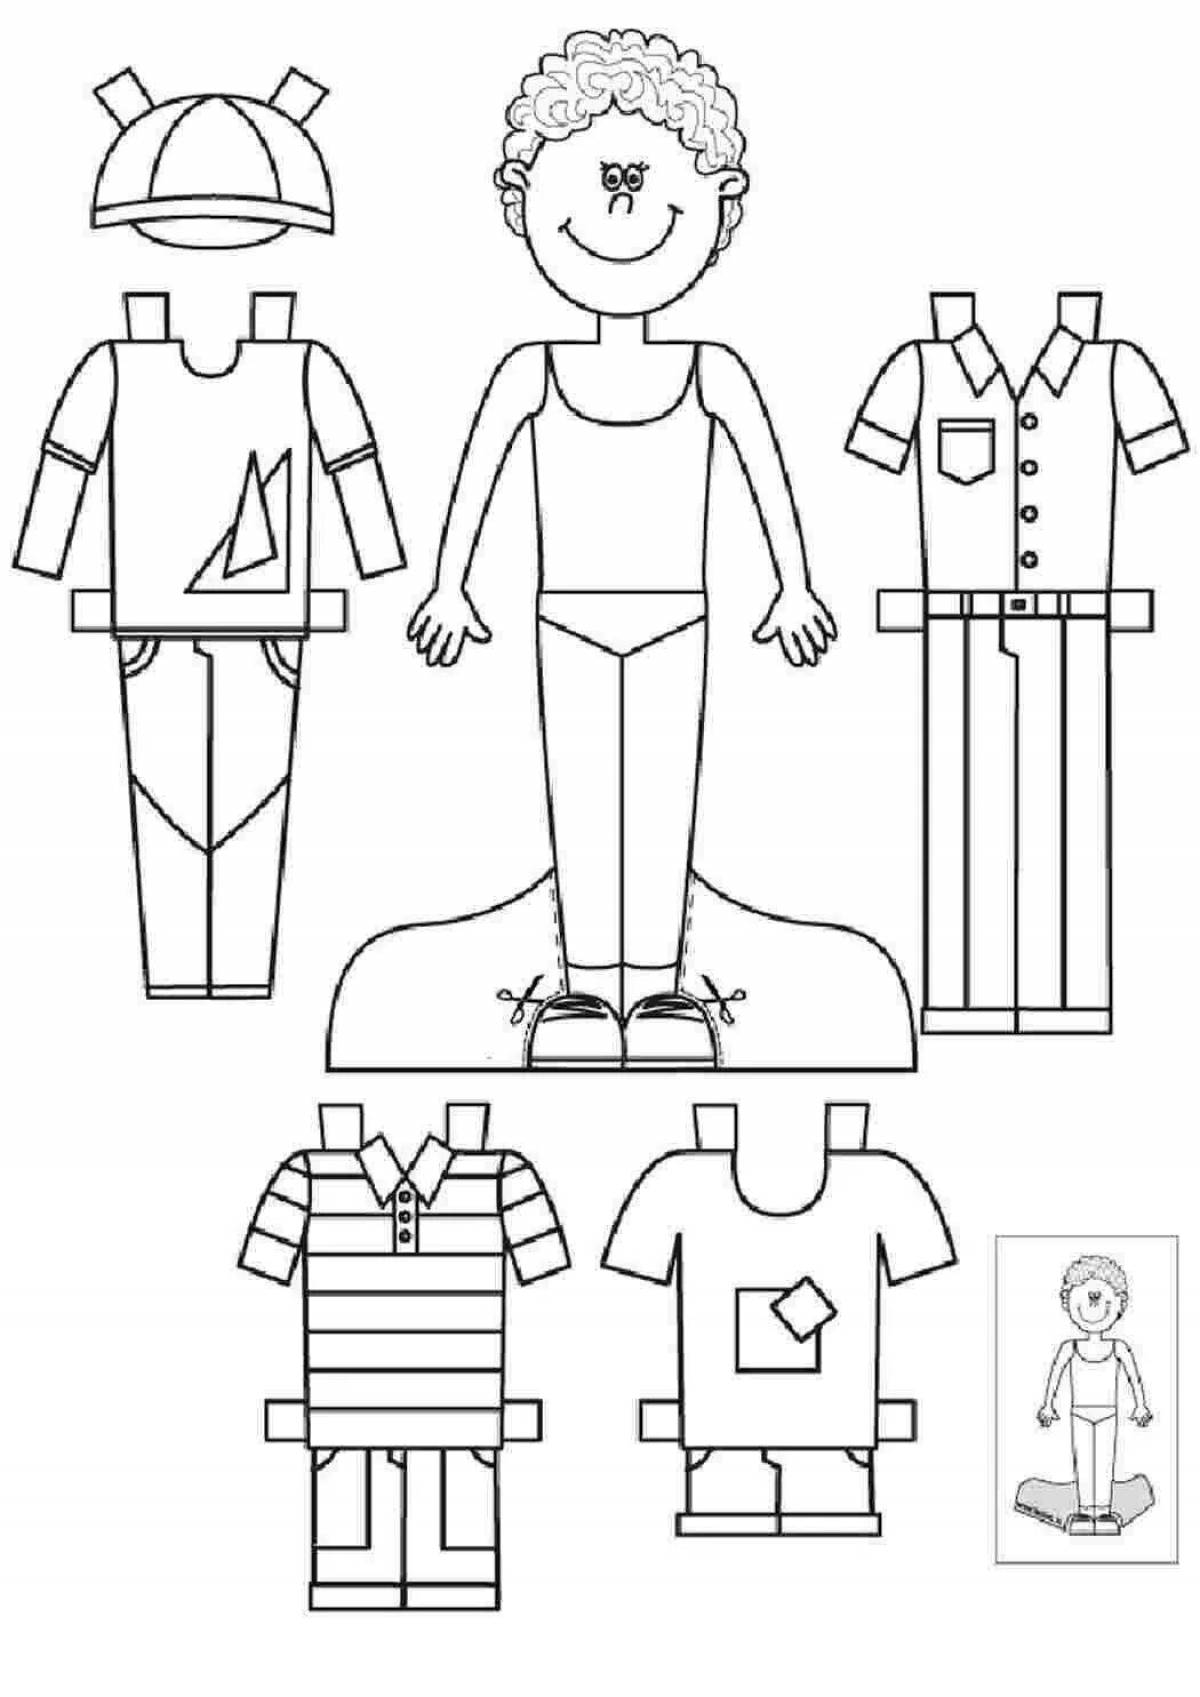 Paper doll boy with cutout clothes #12